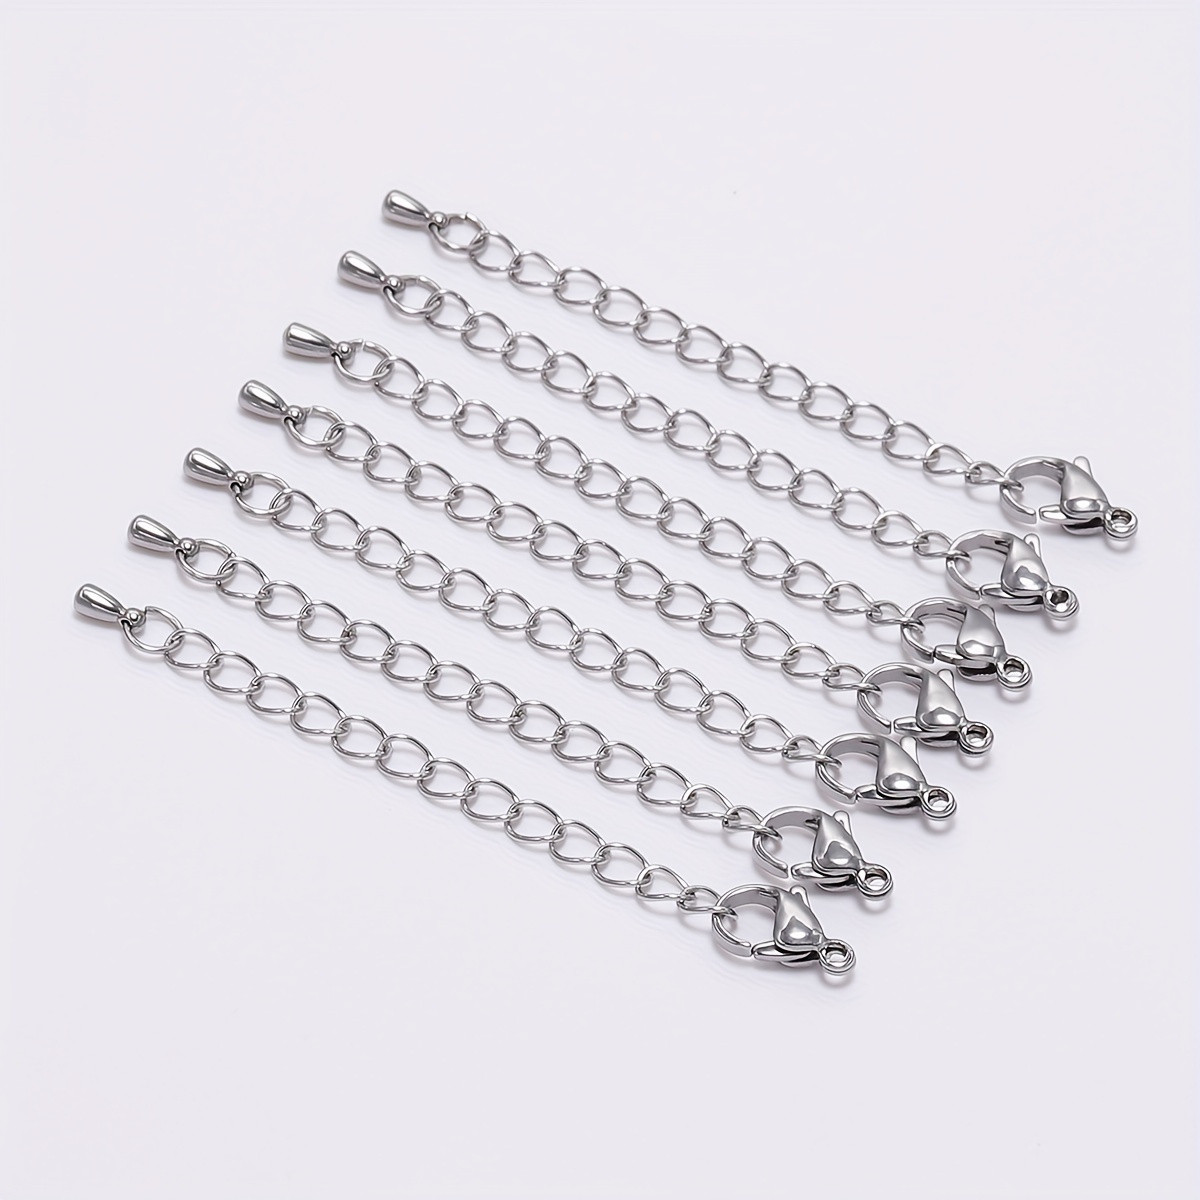 50pcs/lot 50mm Length Extended Extension Tail Chain Silver Color